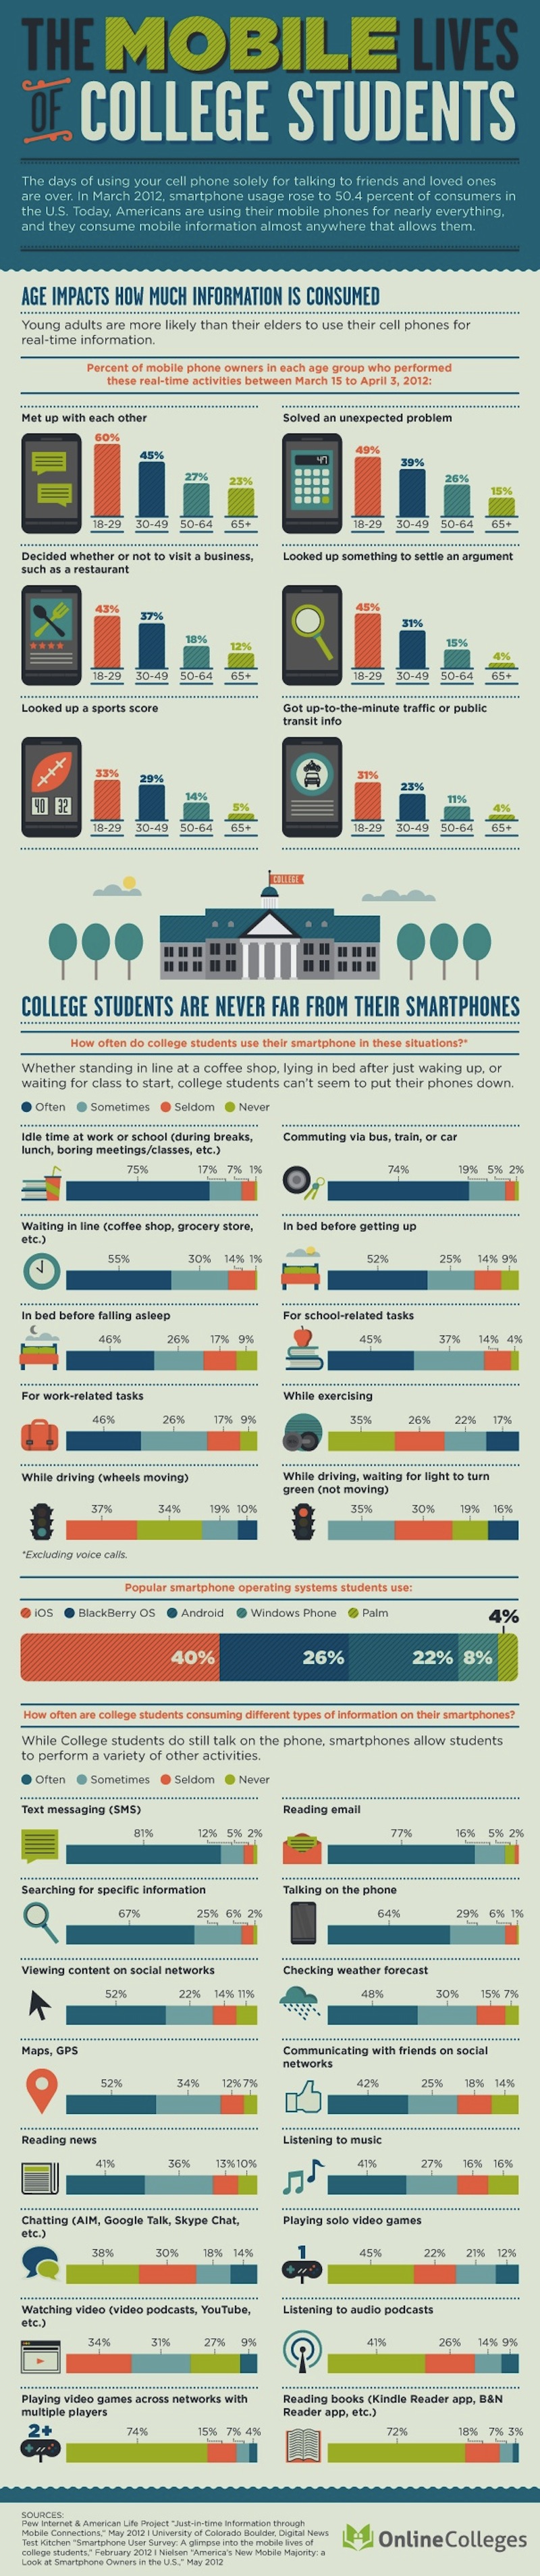 College students love mobiles-Infographic